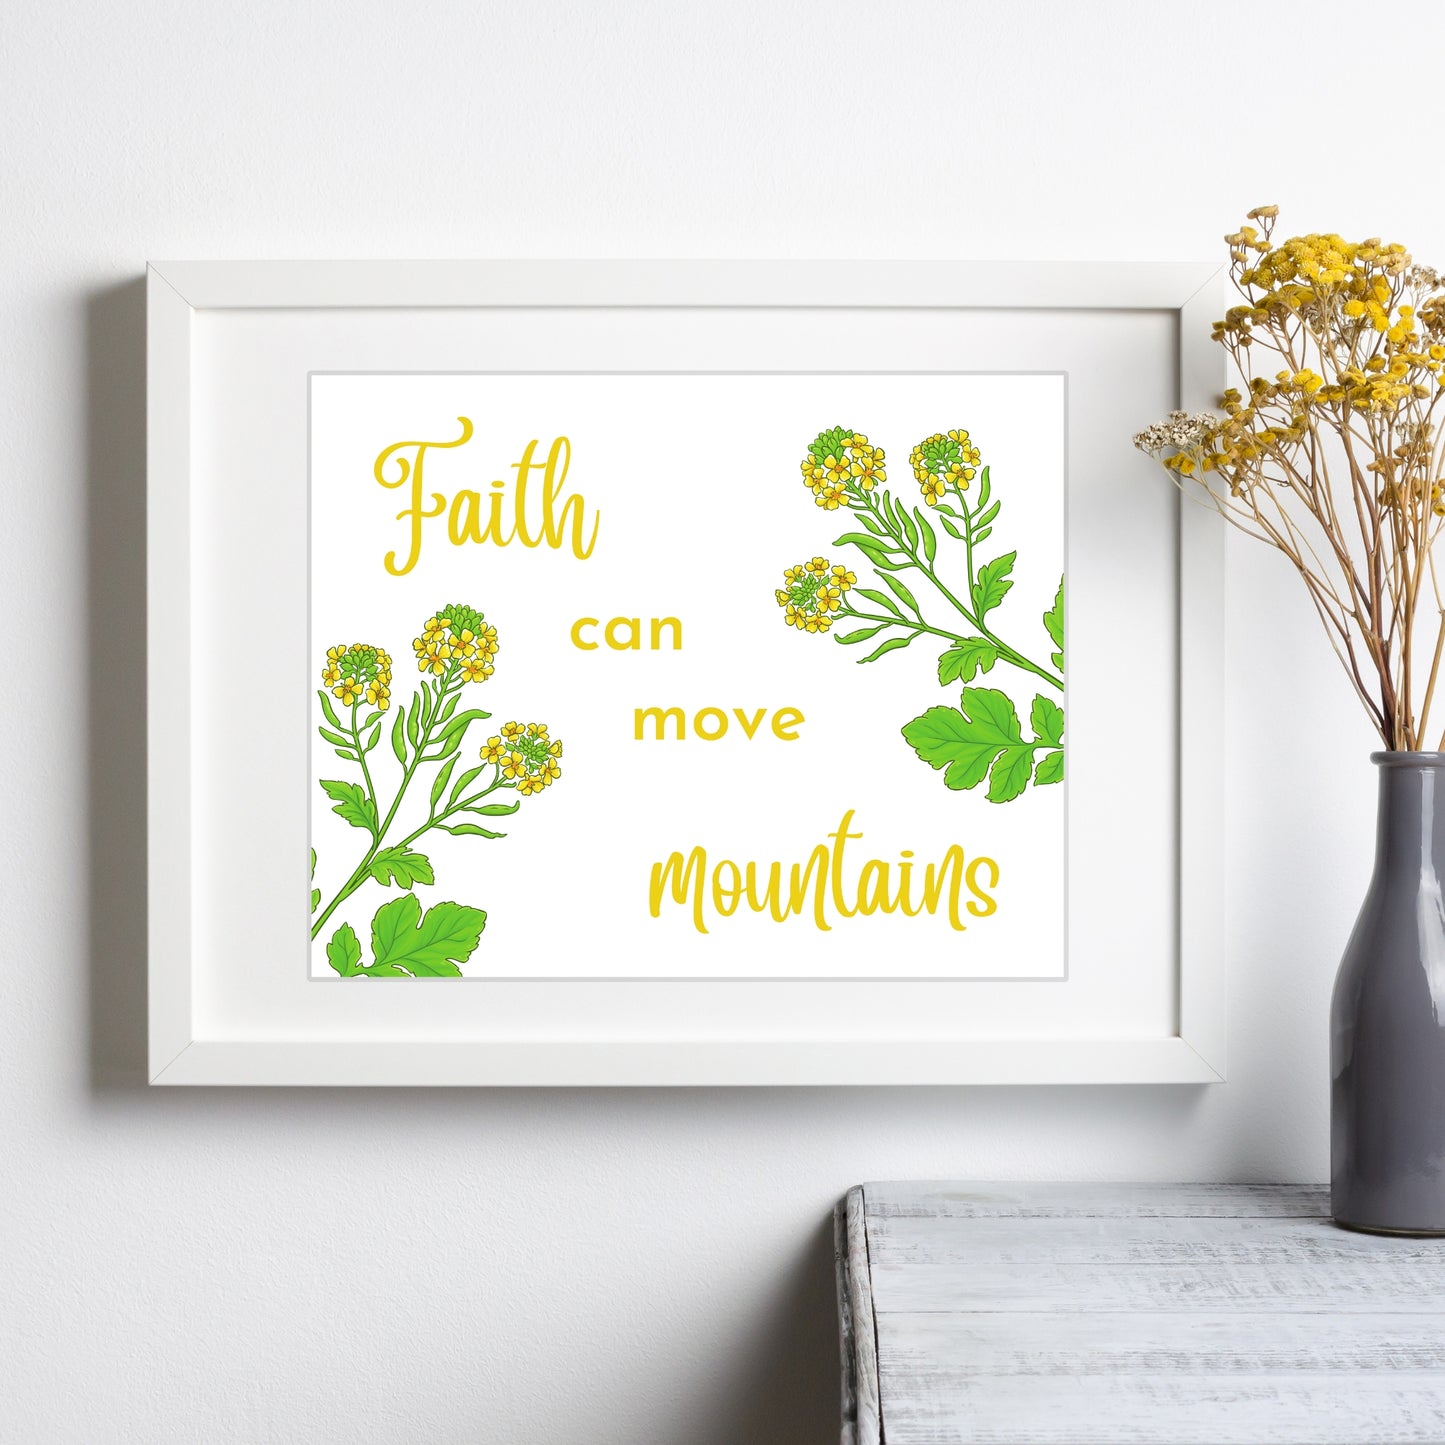 Inspirational Word Art - Faith can move mountains - Mustard Seed Floral Design Wall Decor (8x10 print) | shown in white frame | oak7west.com